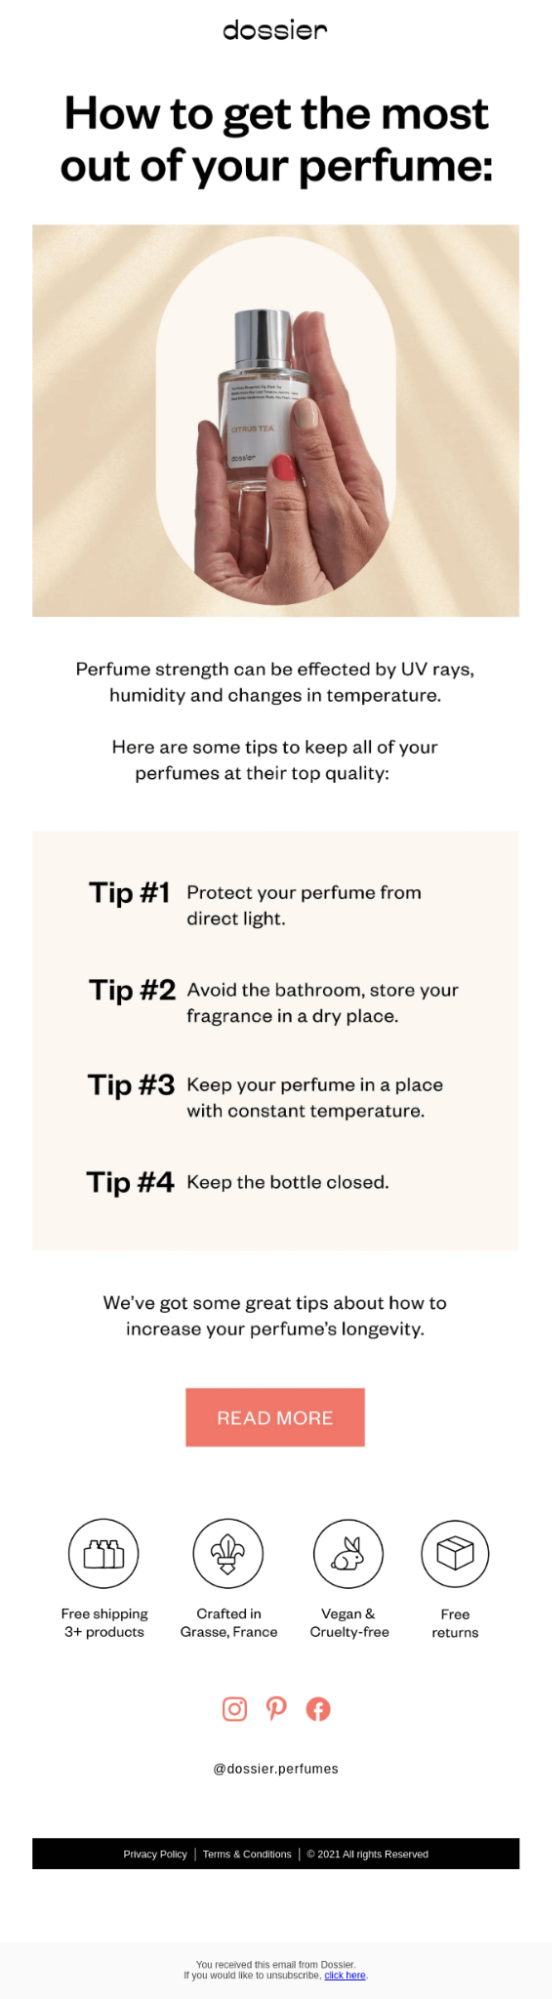 Dossier email sharing four tips for new shoppers on how to get the most out of their perfume purchase.